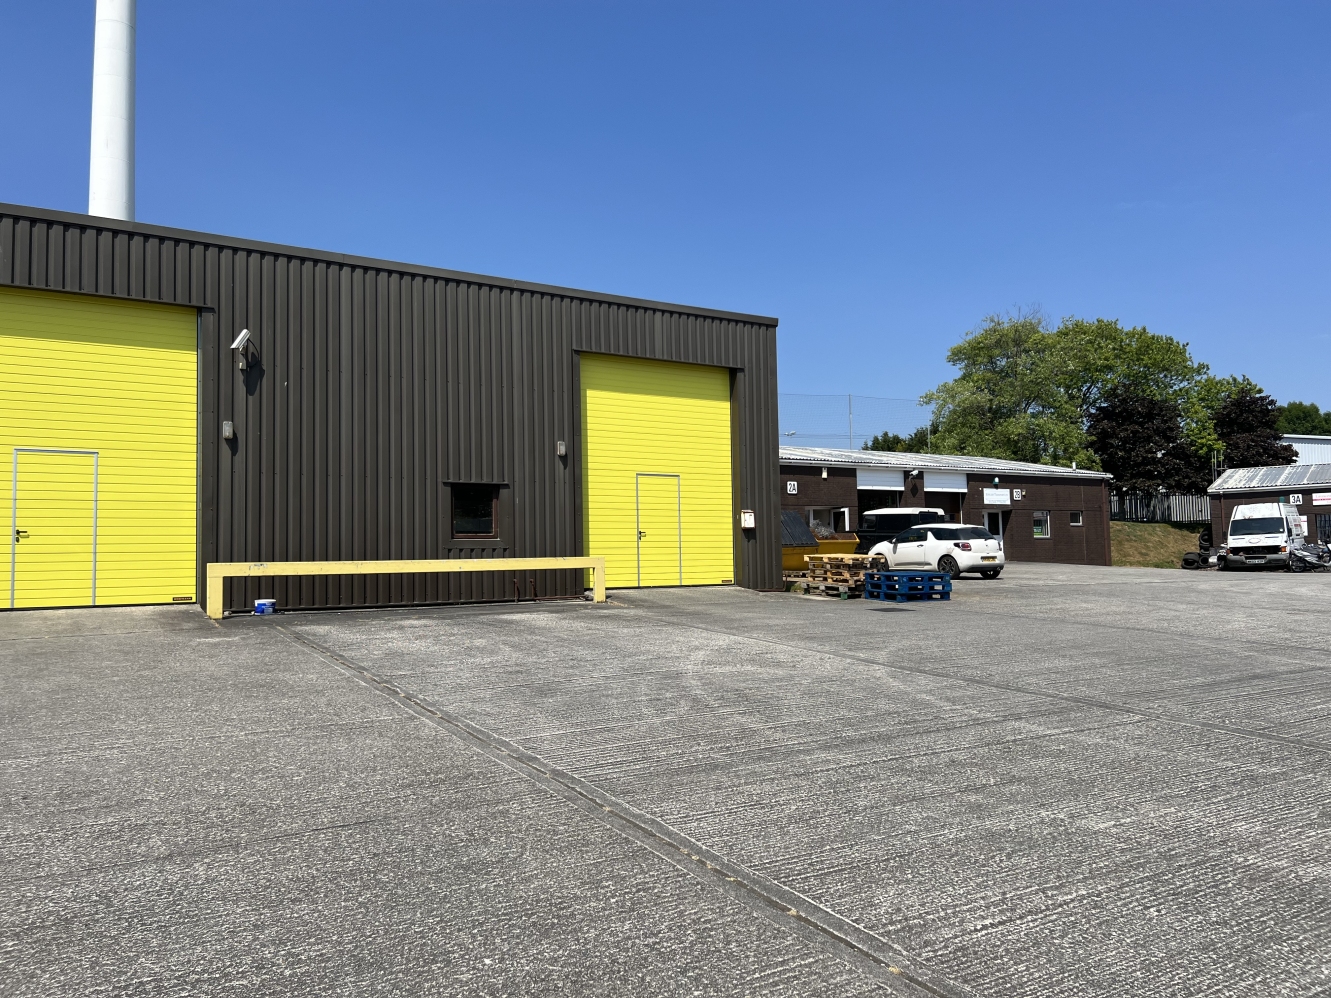 0 bed Light Industrial for rent in Launceston. From Miller Commercial - Commercial